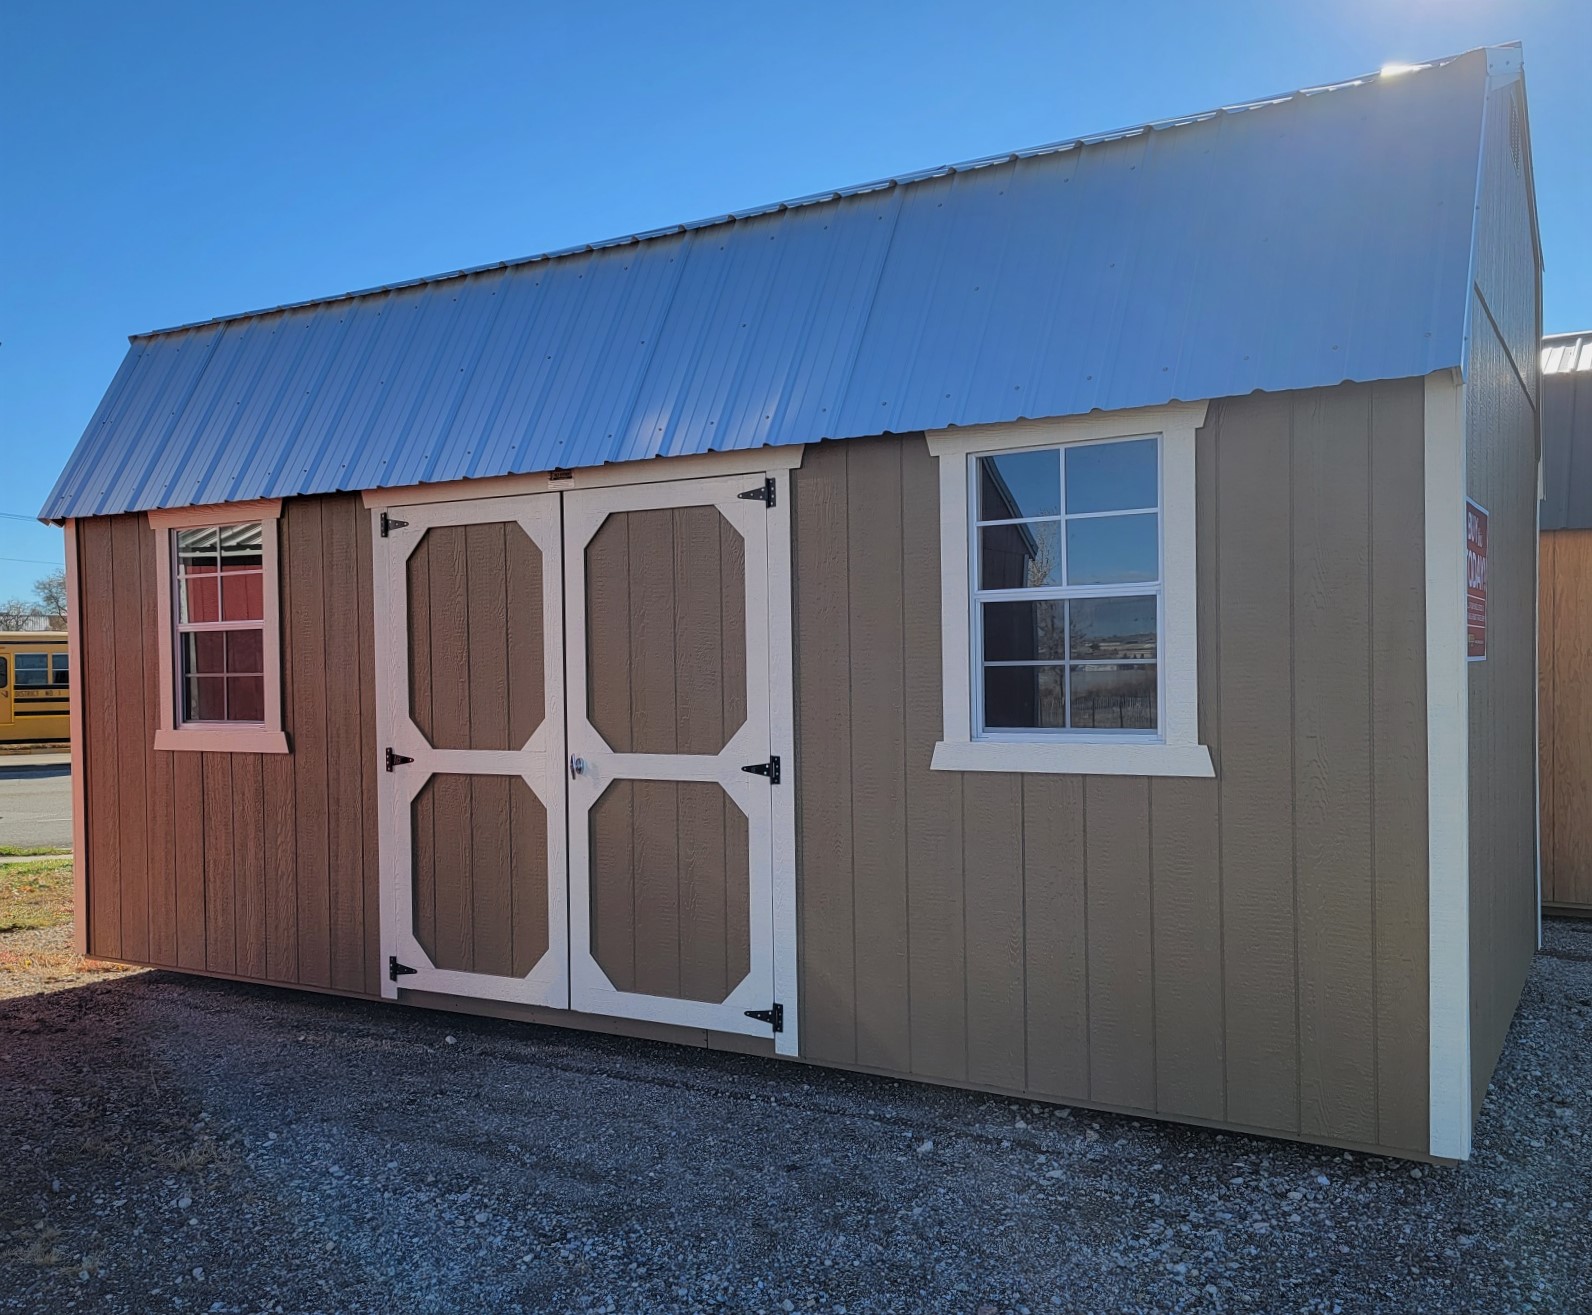 10x20 Painted Lofted Barn Shed | Casper's Sheds For Sale